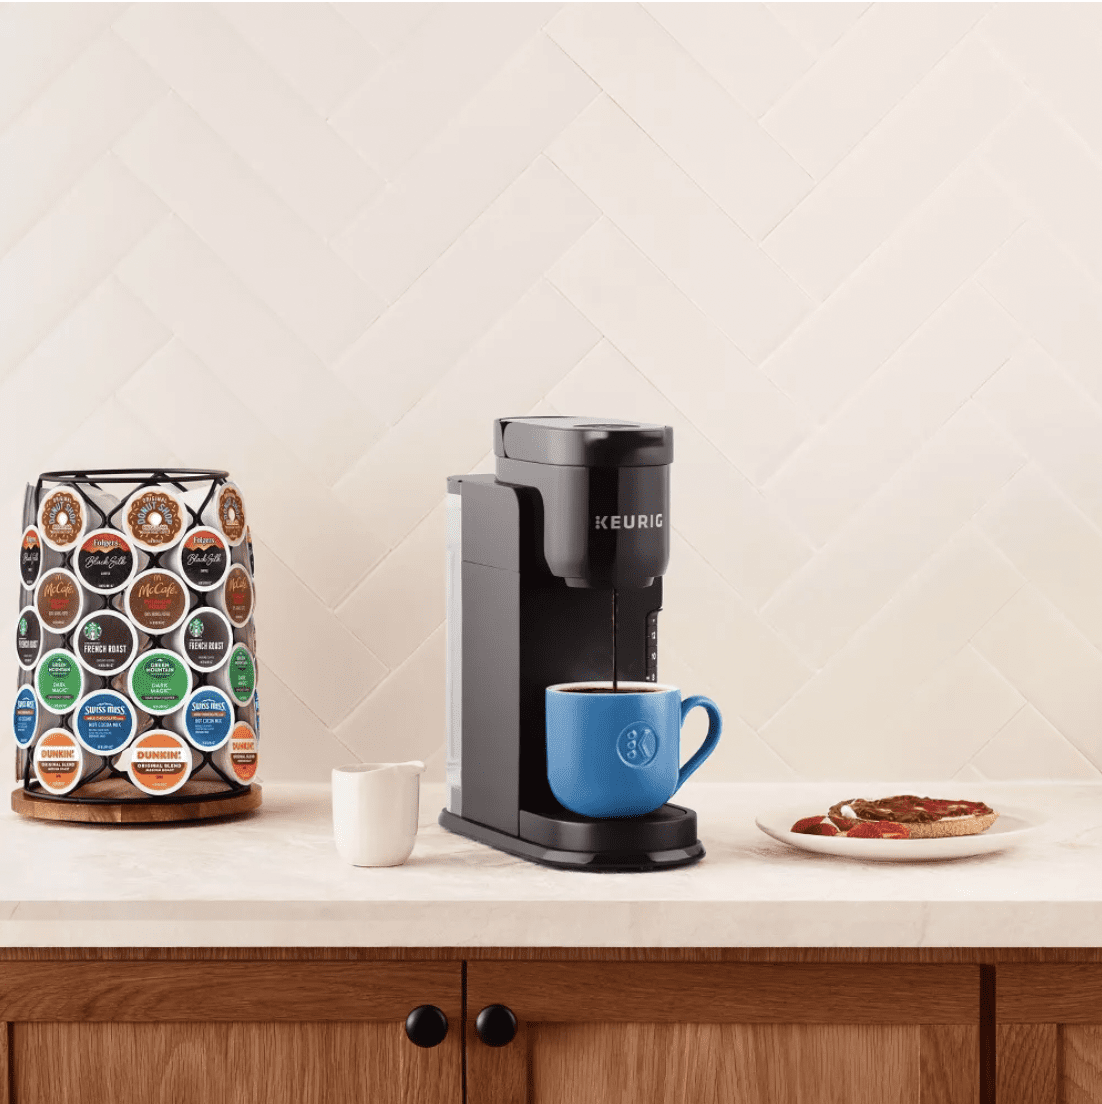 Keurig K-Café Coffee Maker Bundle with Milk Frother - Elevate Your Coffee Experience